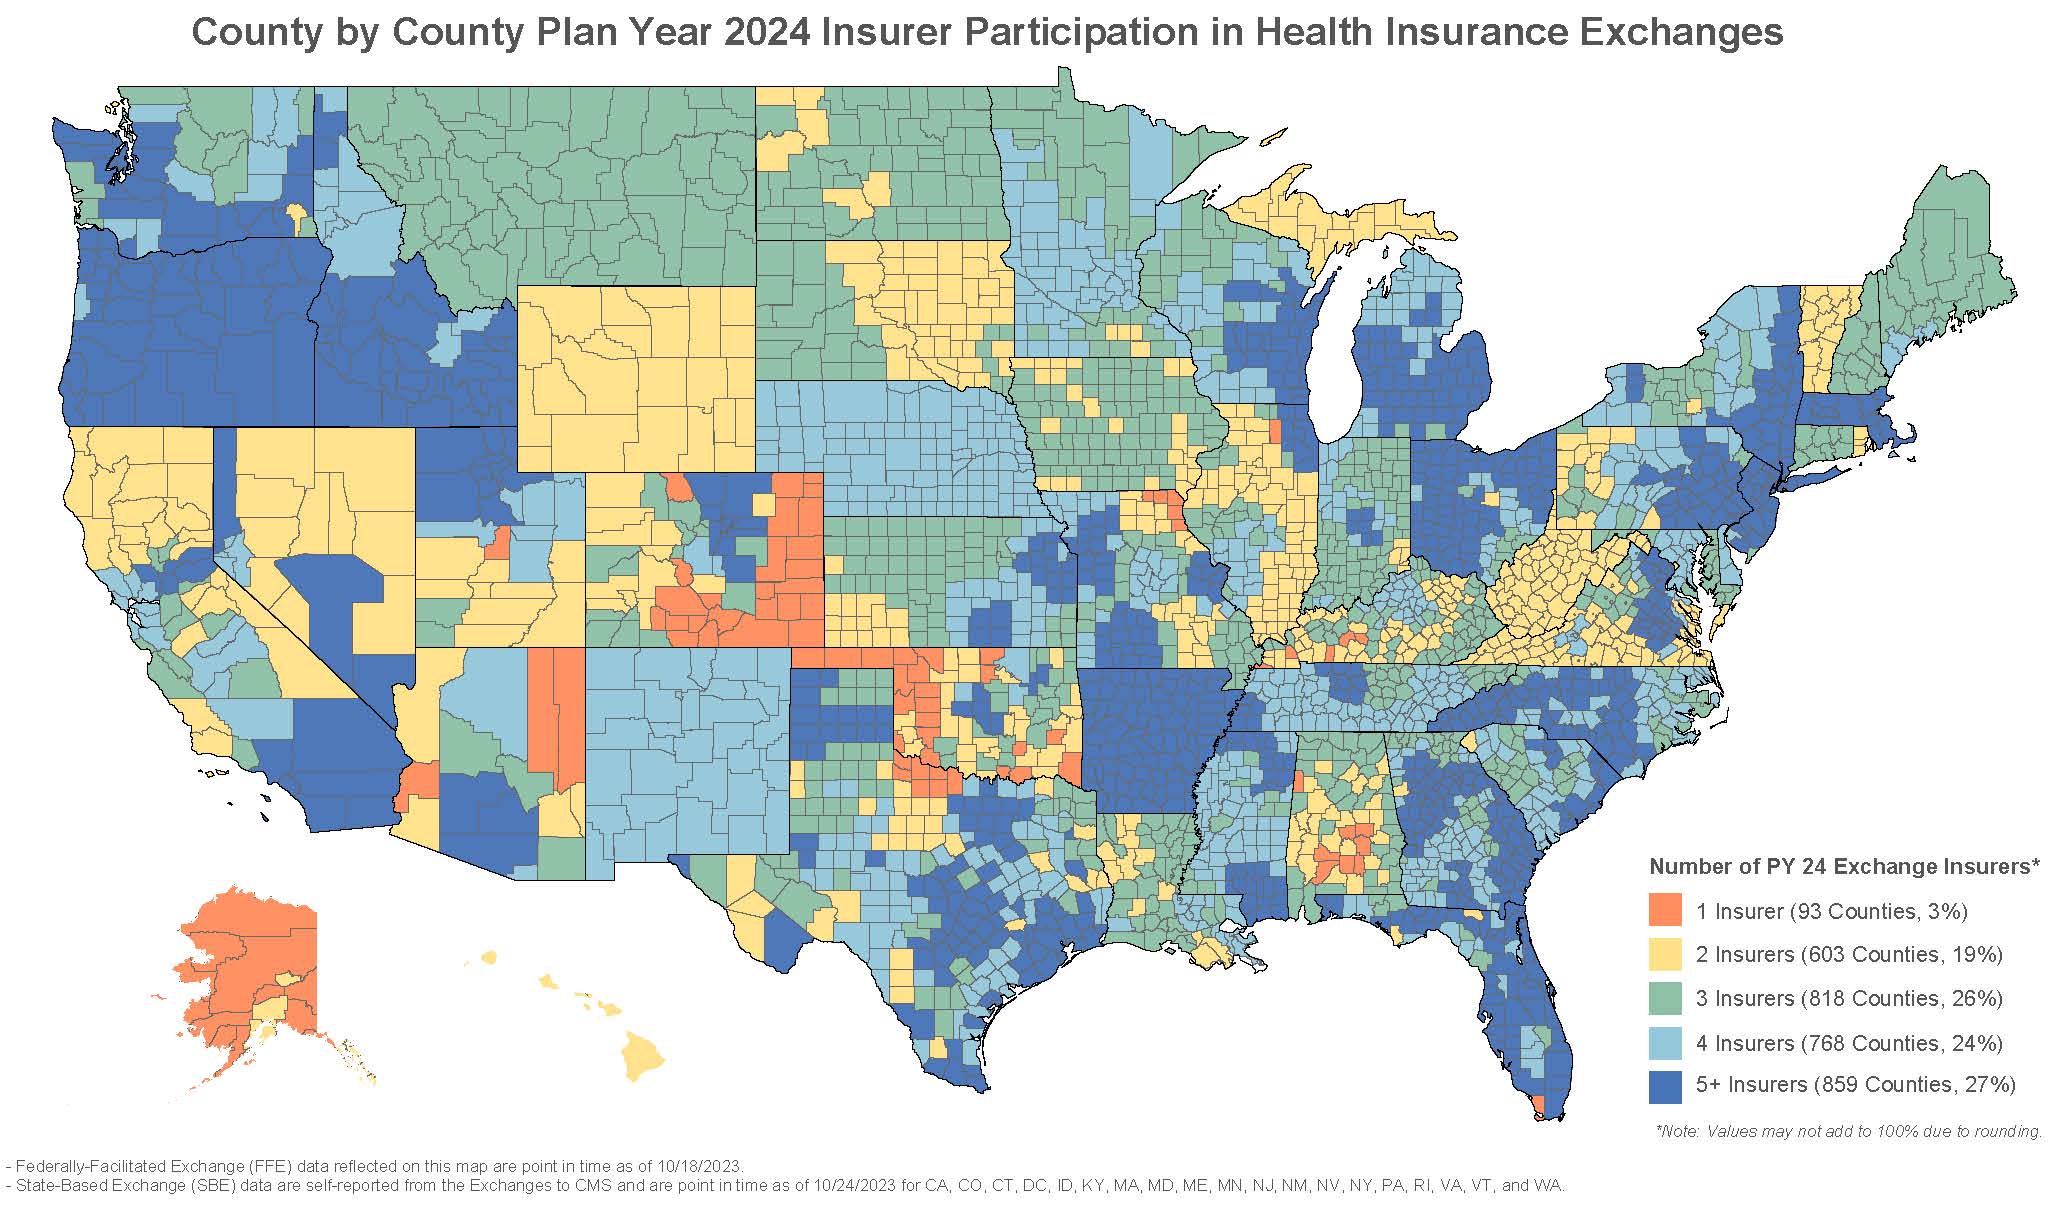 County by County Plan Year 2024 Insurer Participation in Health Insurance Exchanges